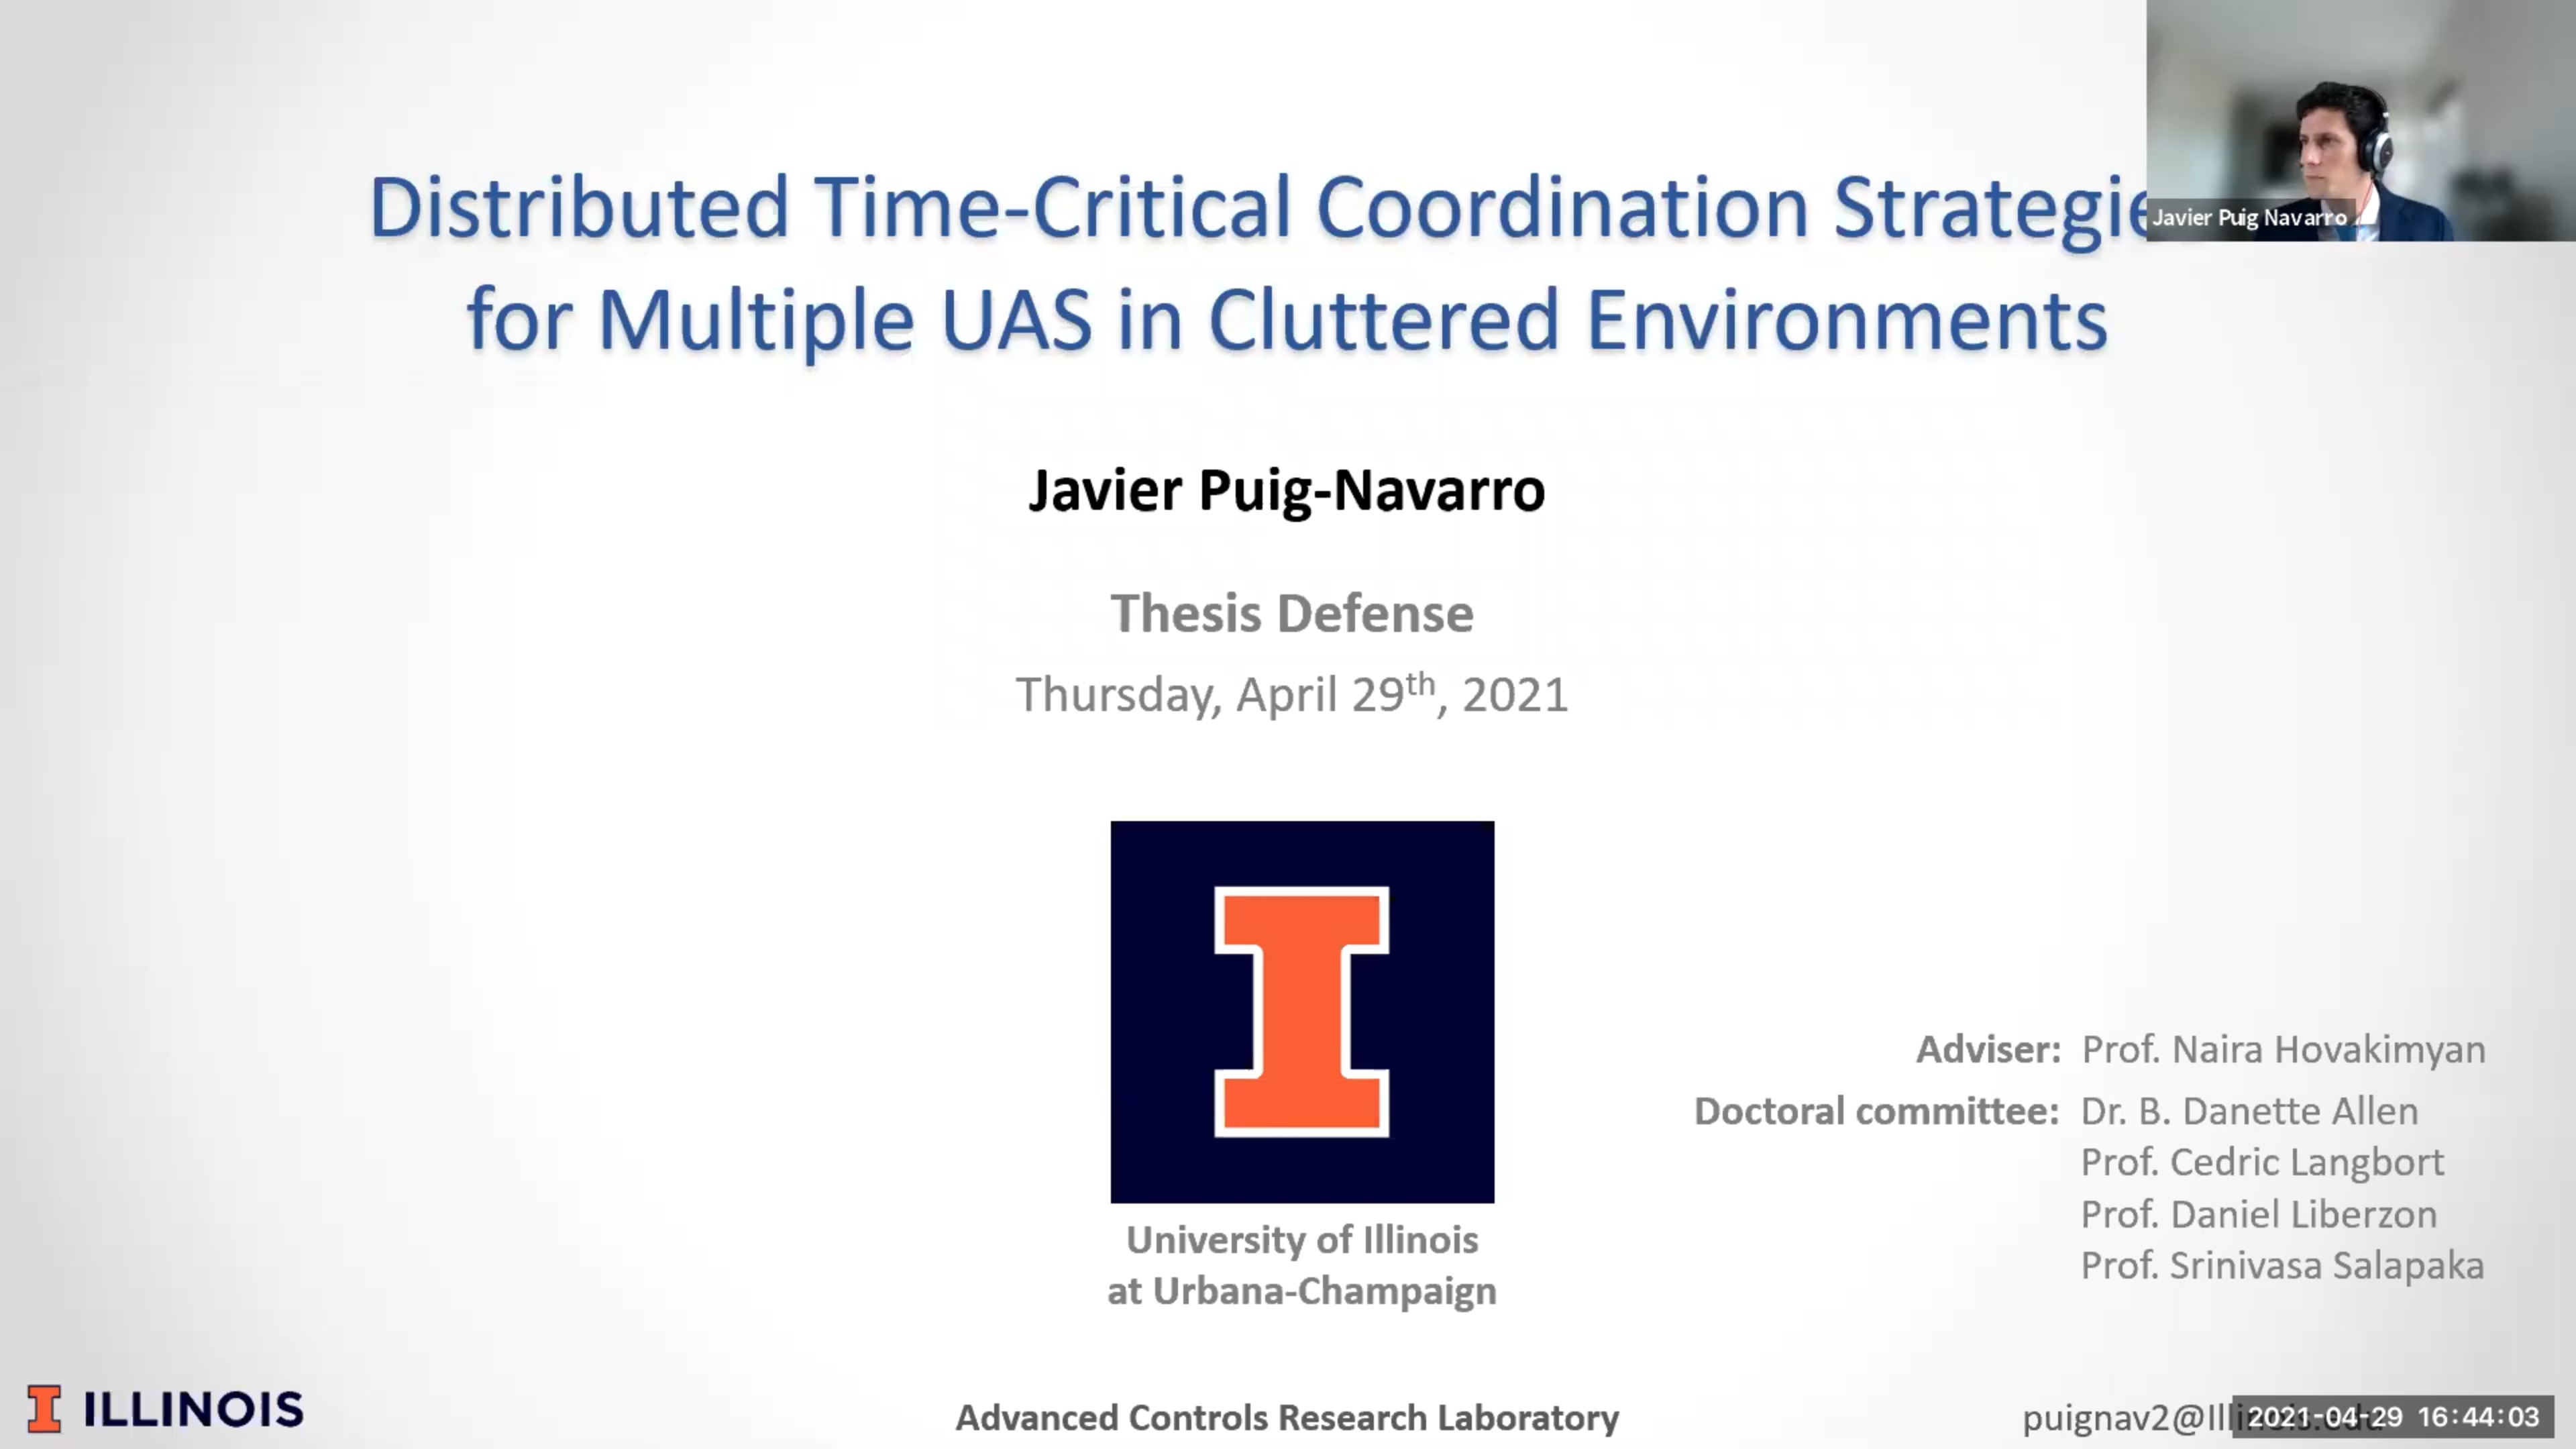 Javier Puig-Navarro defended his thesis successfully!